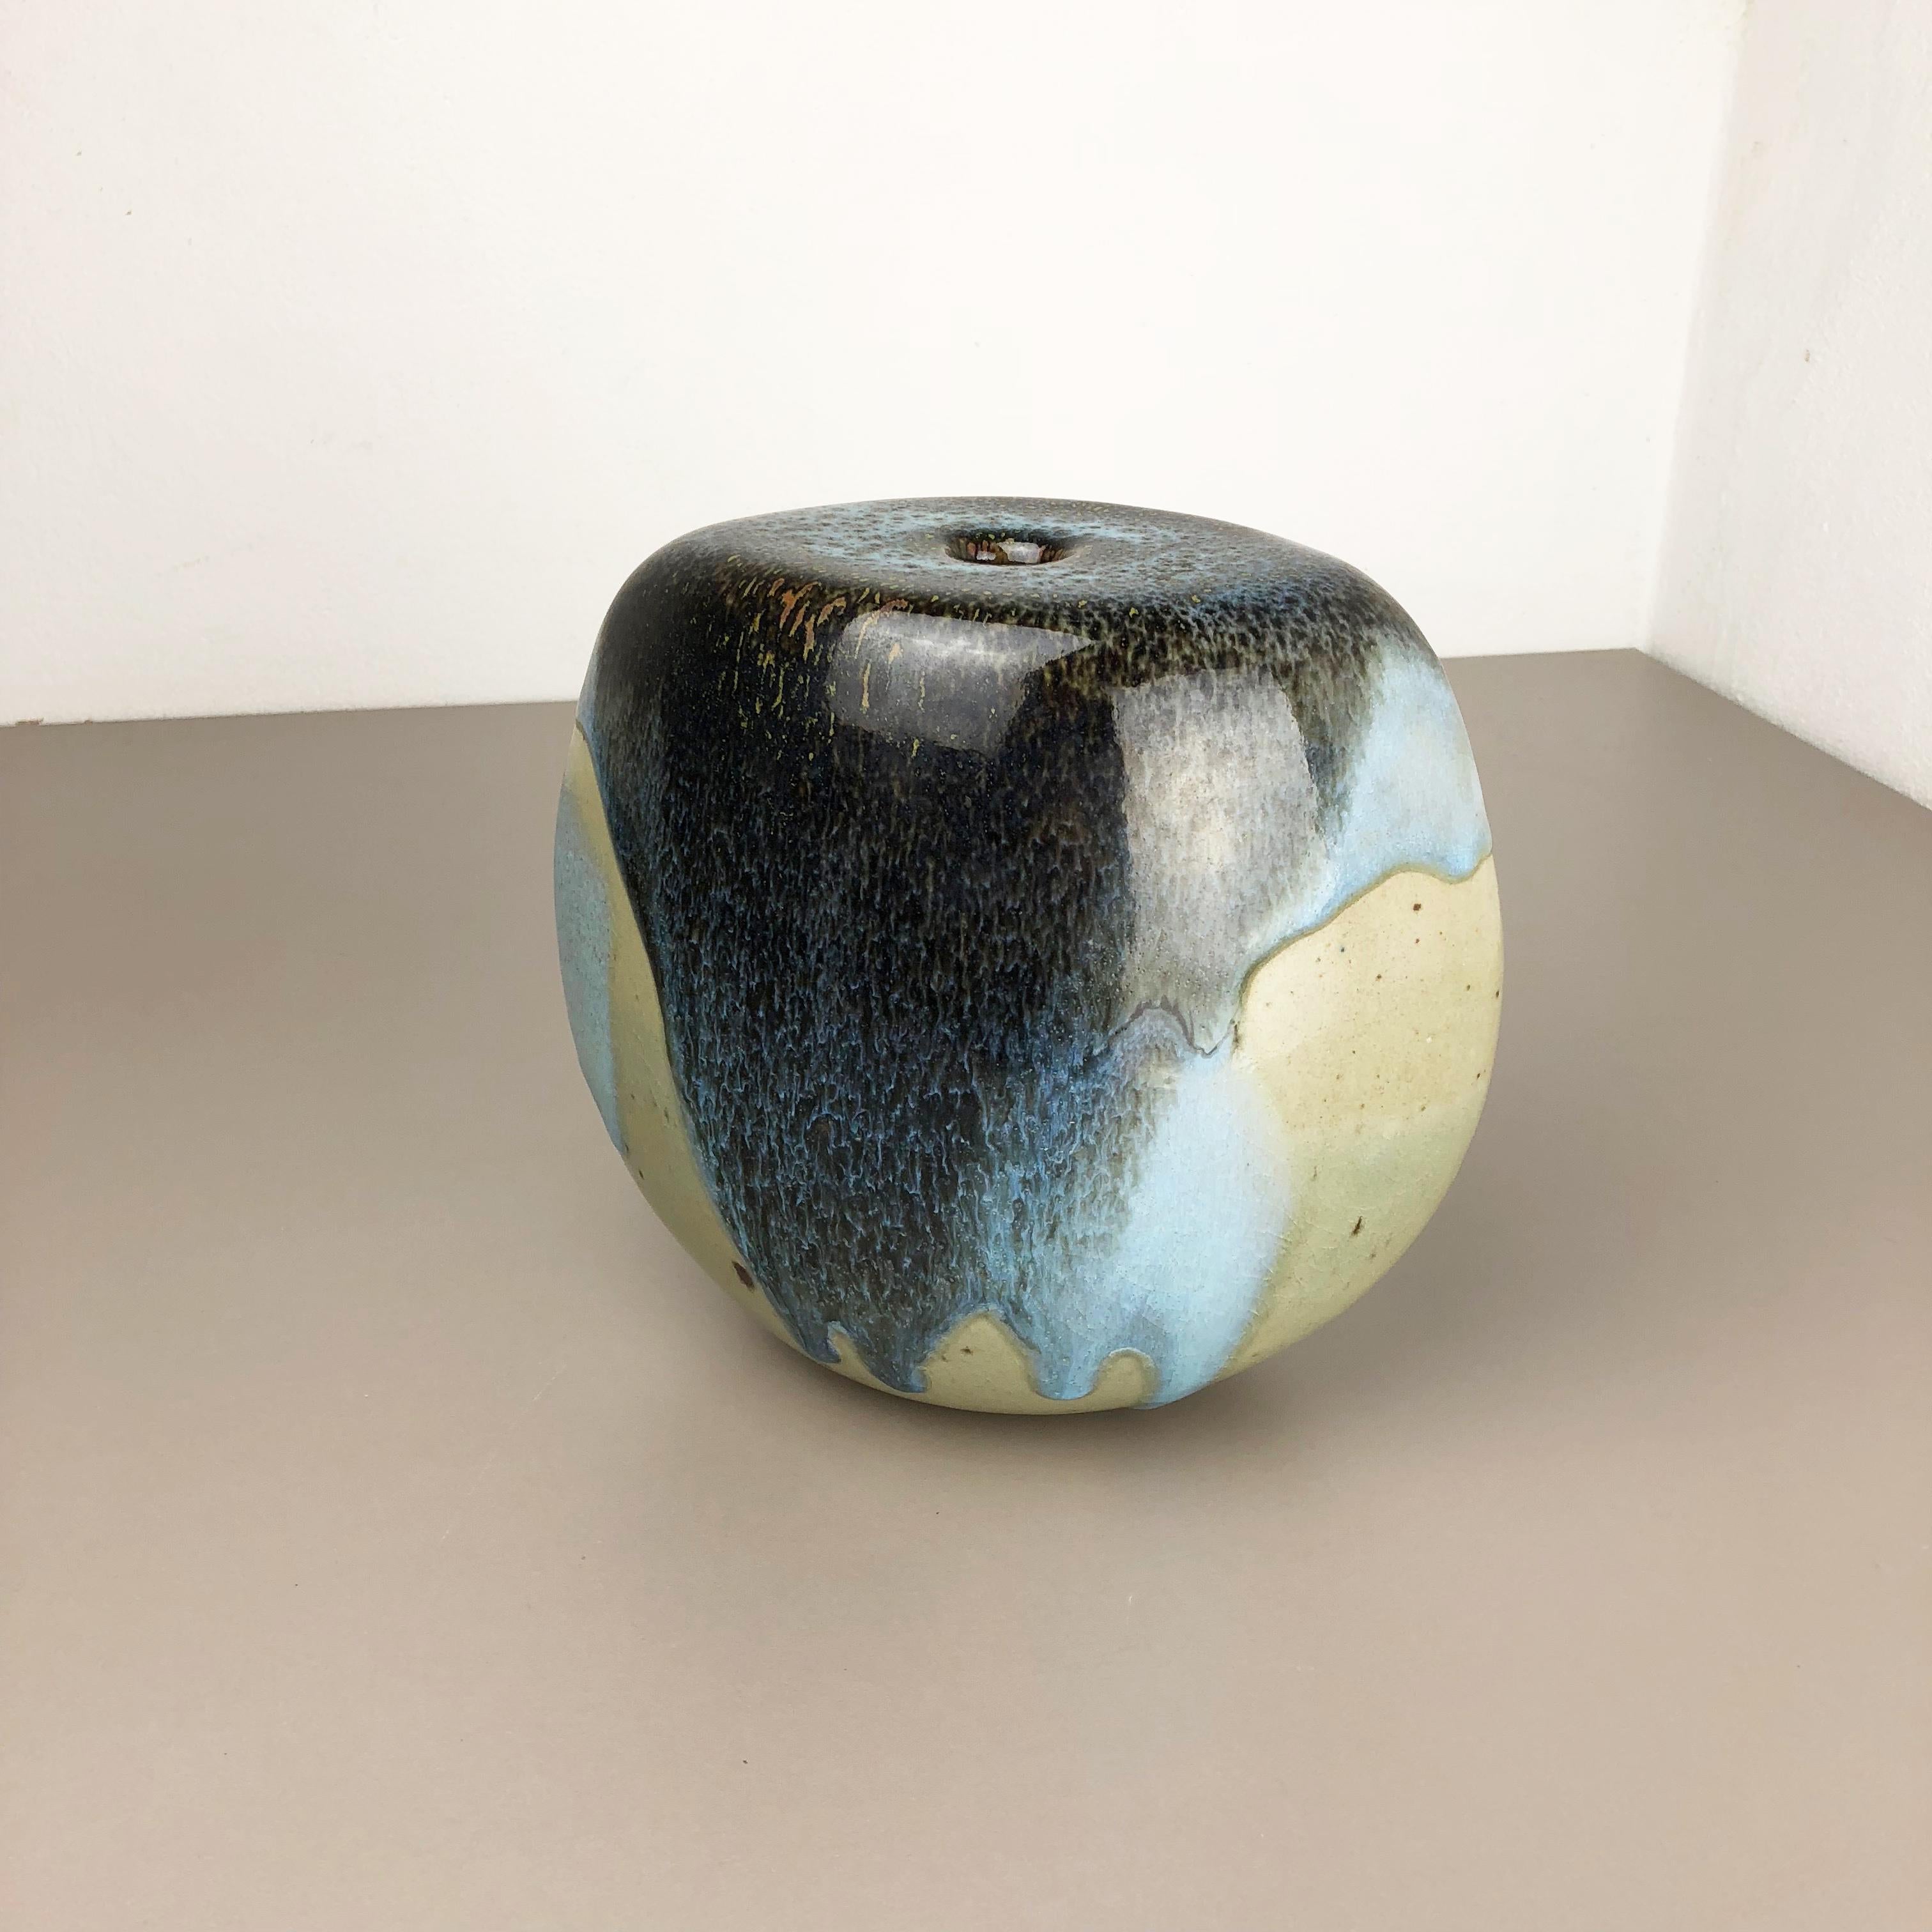 Pottery Abstract Ceramic Studio Stoneware Vase by Gotlind Weigel, Germany, 1960s For Sale